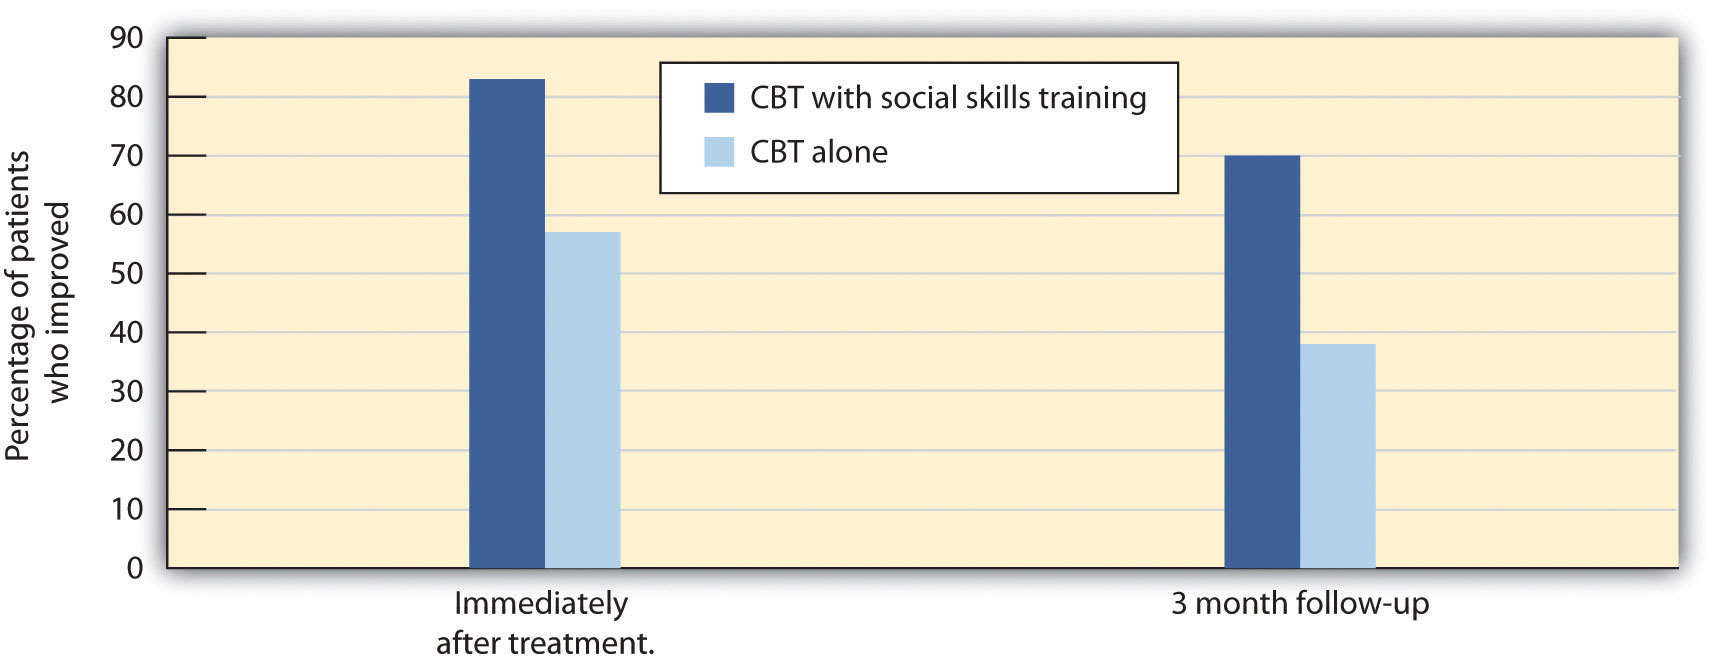 This chart contrasts percentage of patients who improved by immediately after treatment and 3-month follow-up for CBT with social skills training and CBT alone. Long description available.